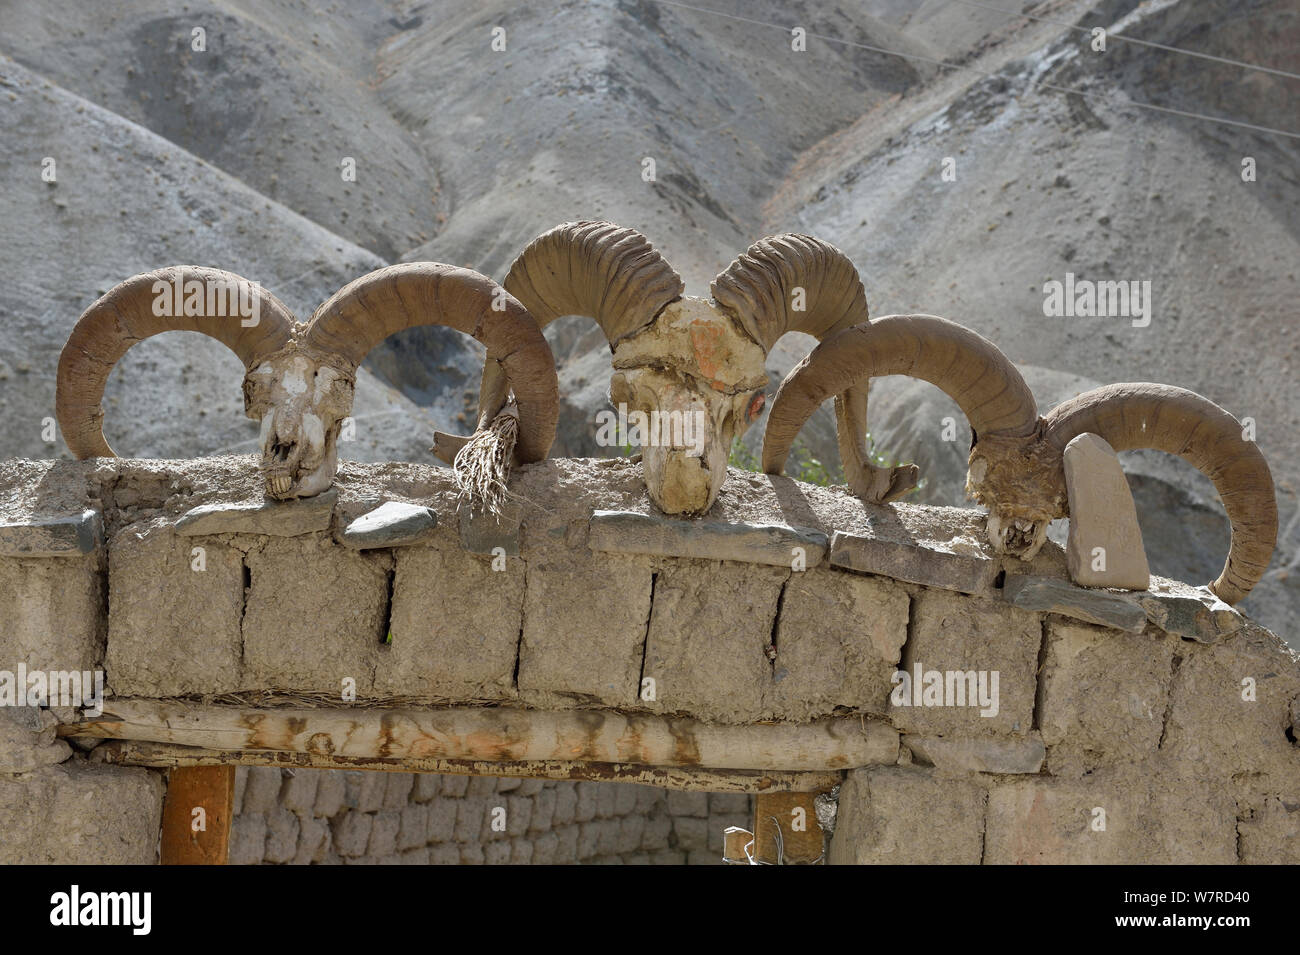 Skulls of two Bharal (Pseudois nayaur) and one Argali (Ovis ammon) mountain sheep, on wall in a village, Hemis NP, at altitude of 4200m, Ladakh, India, October 2012 Stock Photo